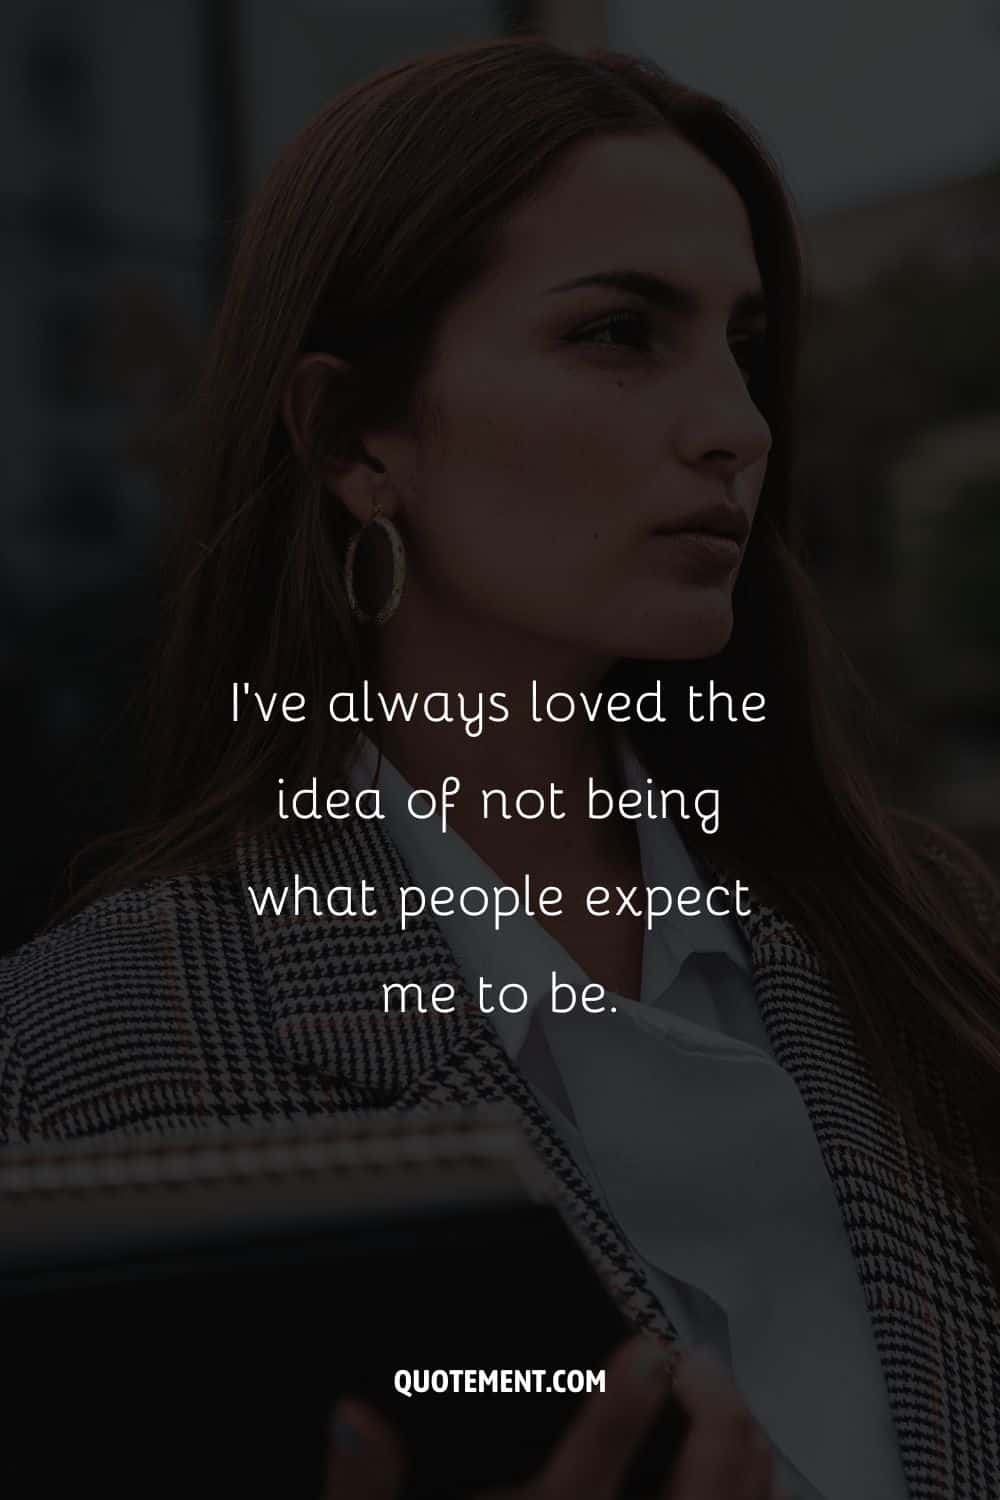 I’ve always loved the idea of not being what people expect me to be.